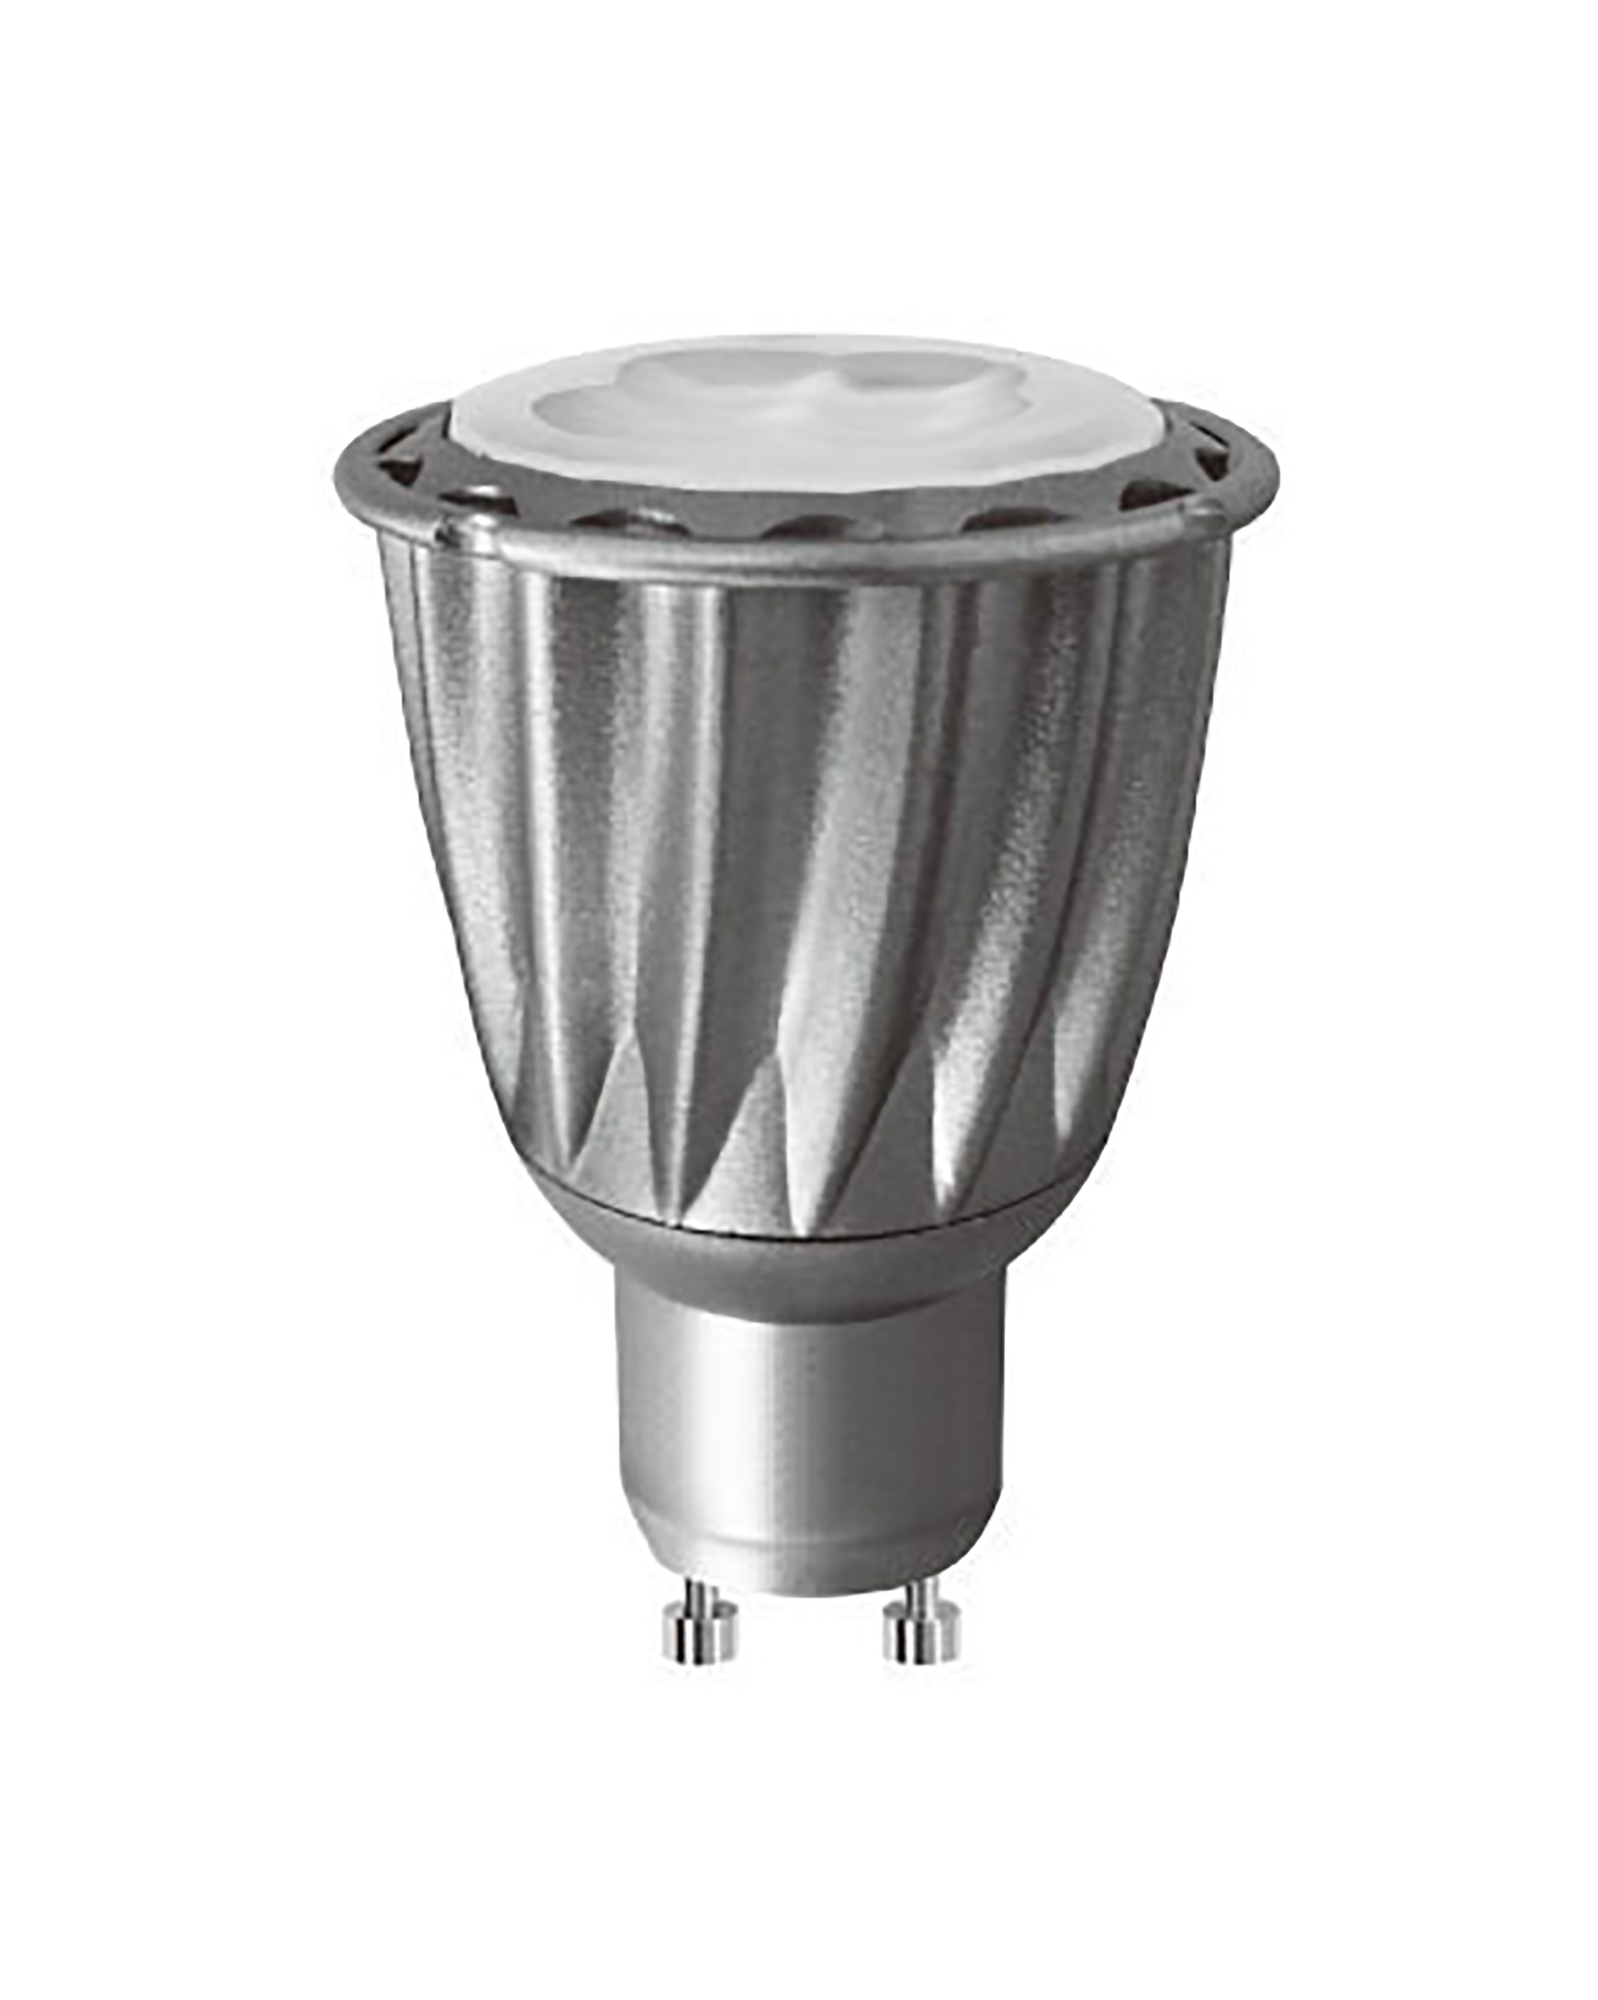 746101535  High Power LED GU10 Dimmable 10W 6400K 548lm